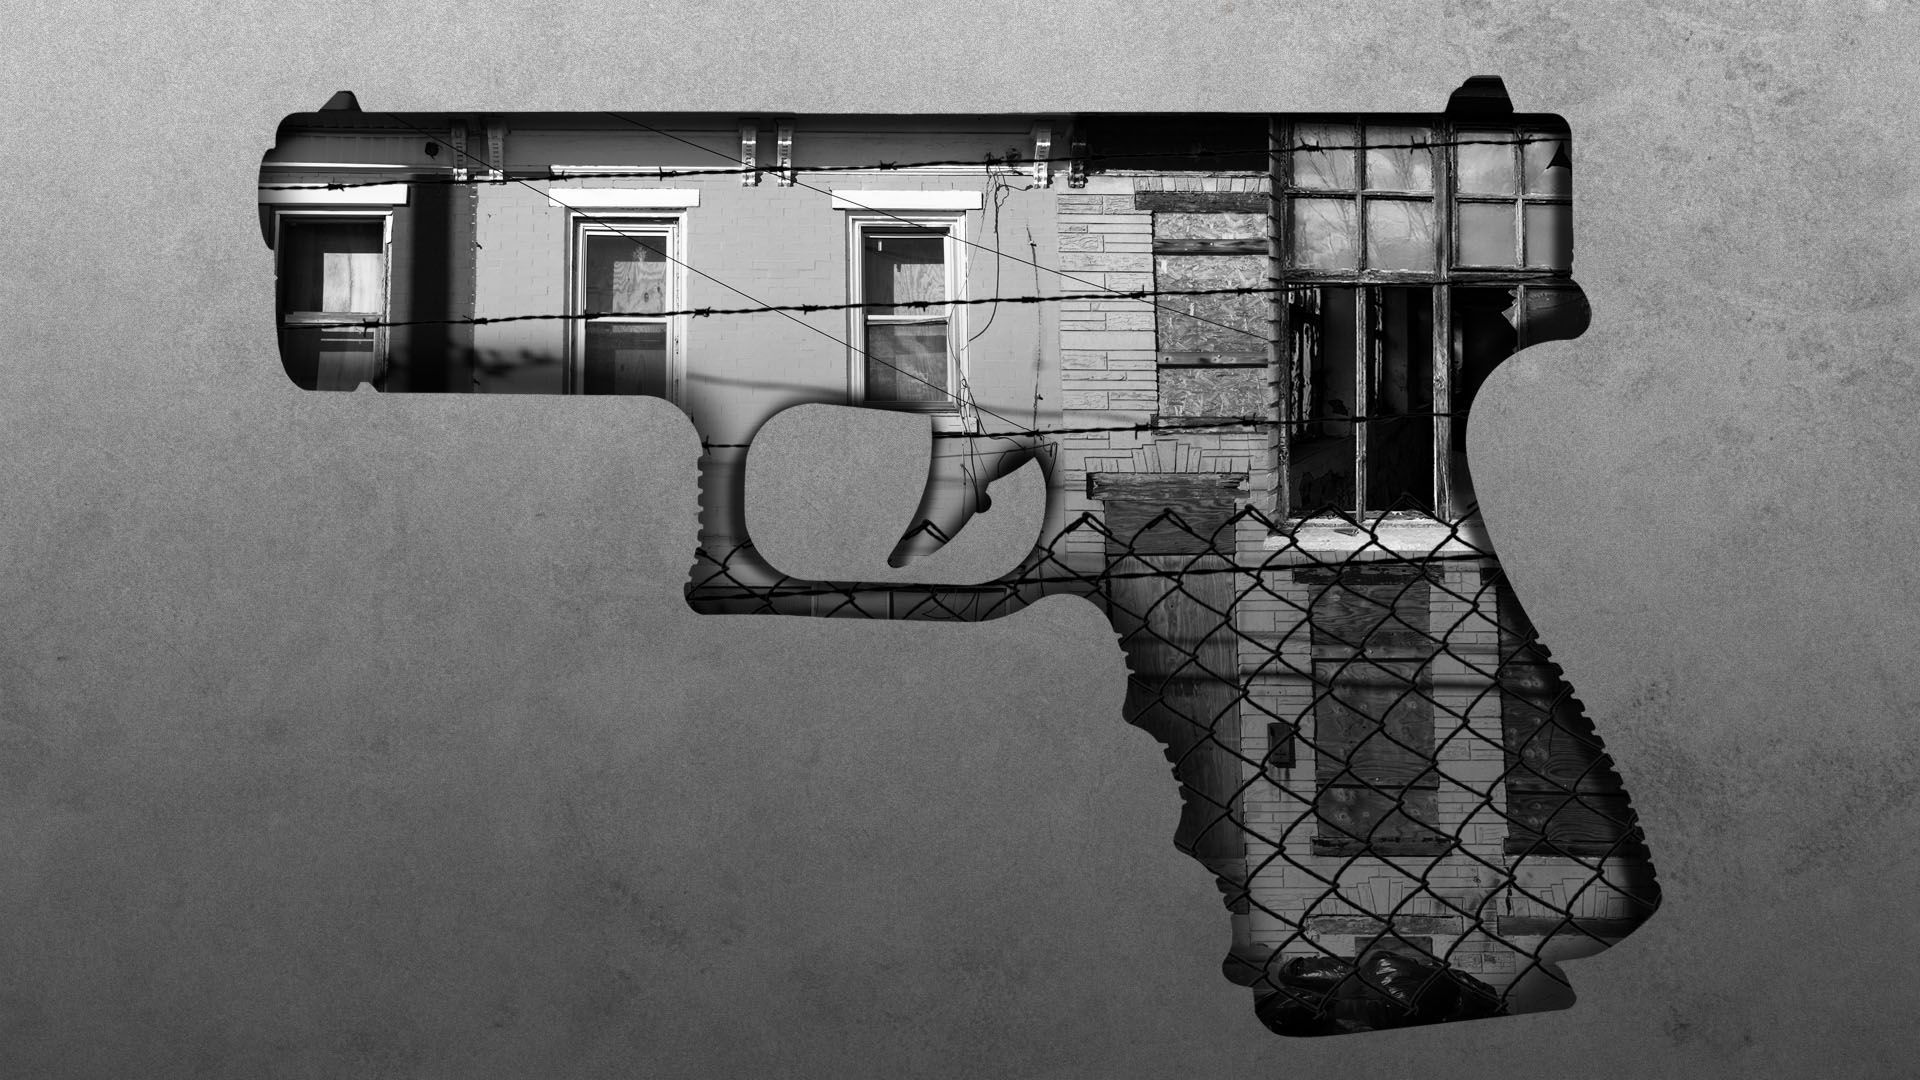 Illustration of boarded up homes, broken windows, and chain link fence in the shape of a firearm